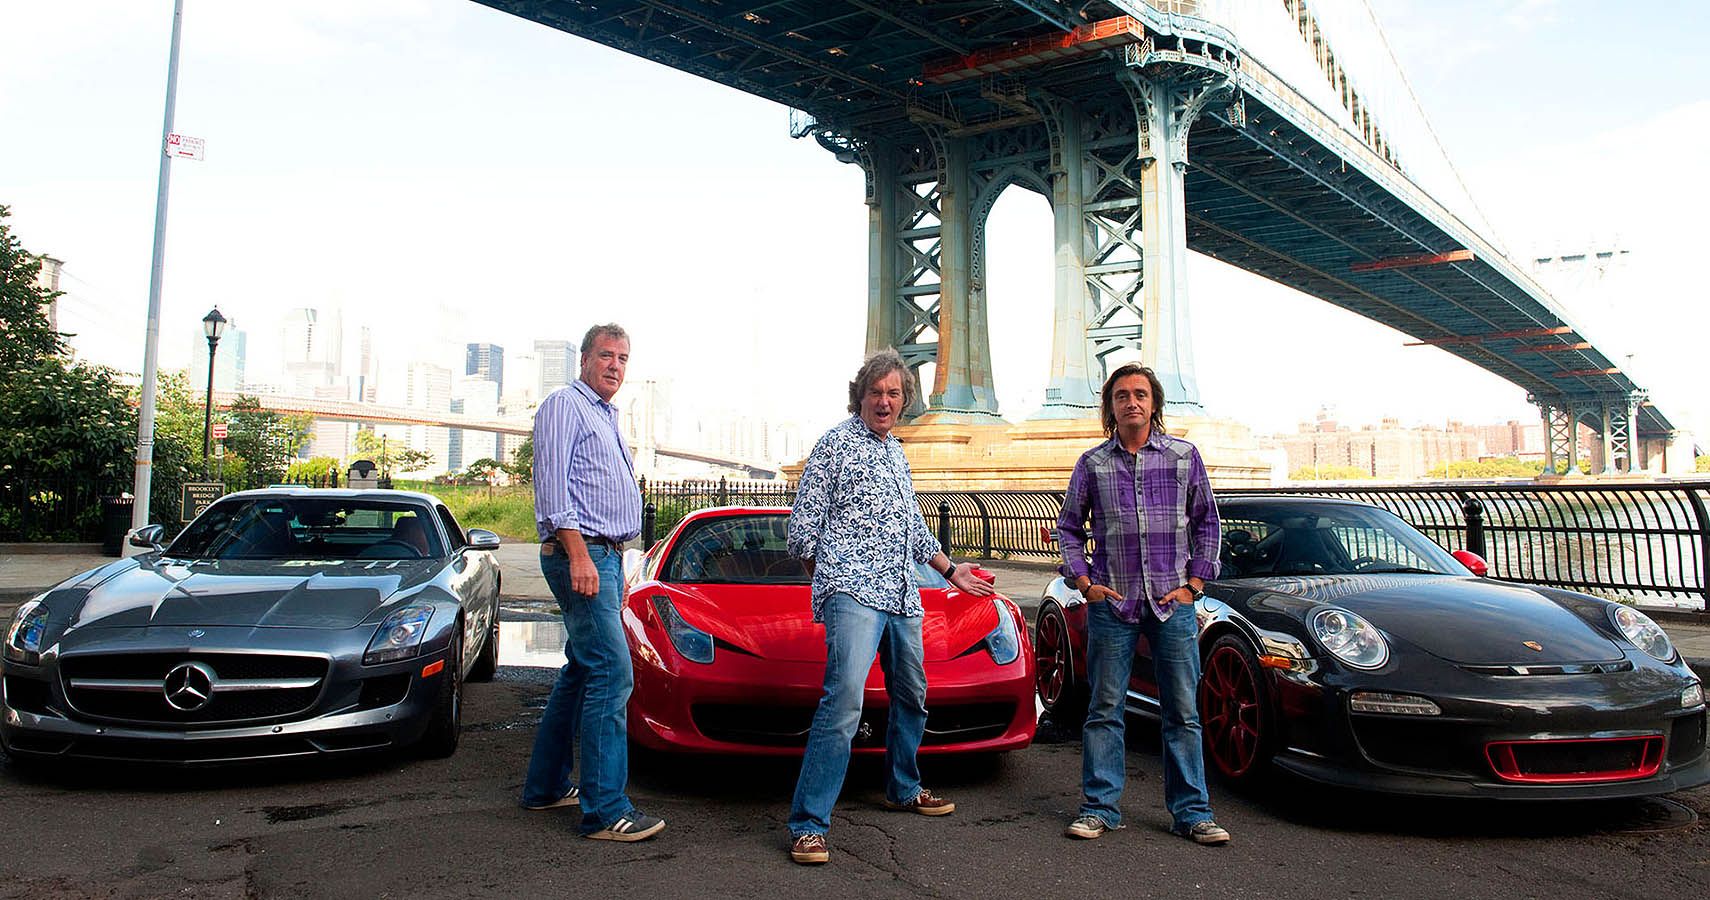 Top Gear: One Of The Longest Running Car Shows Till Date